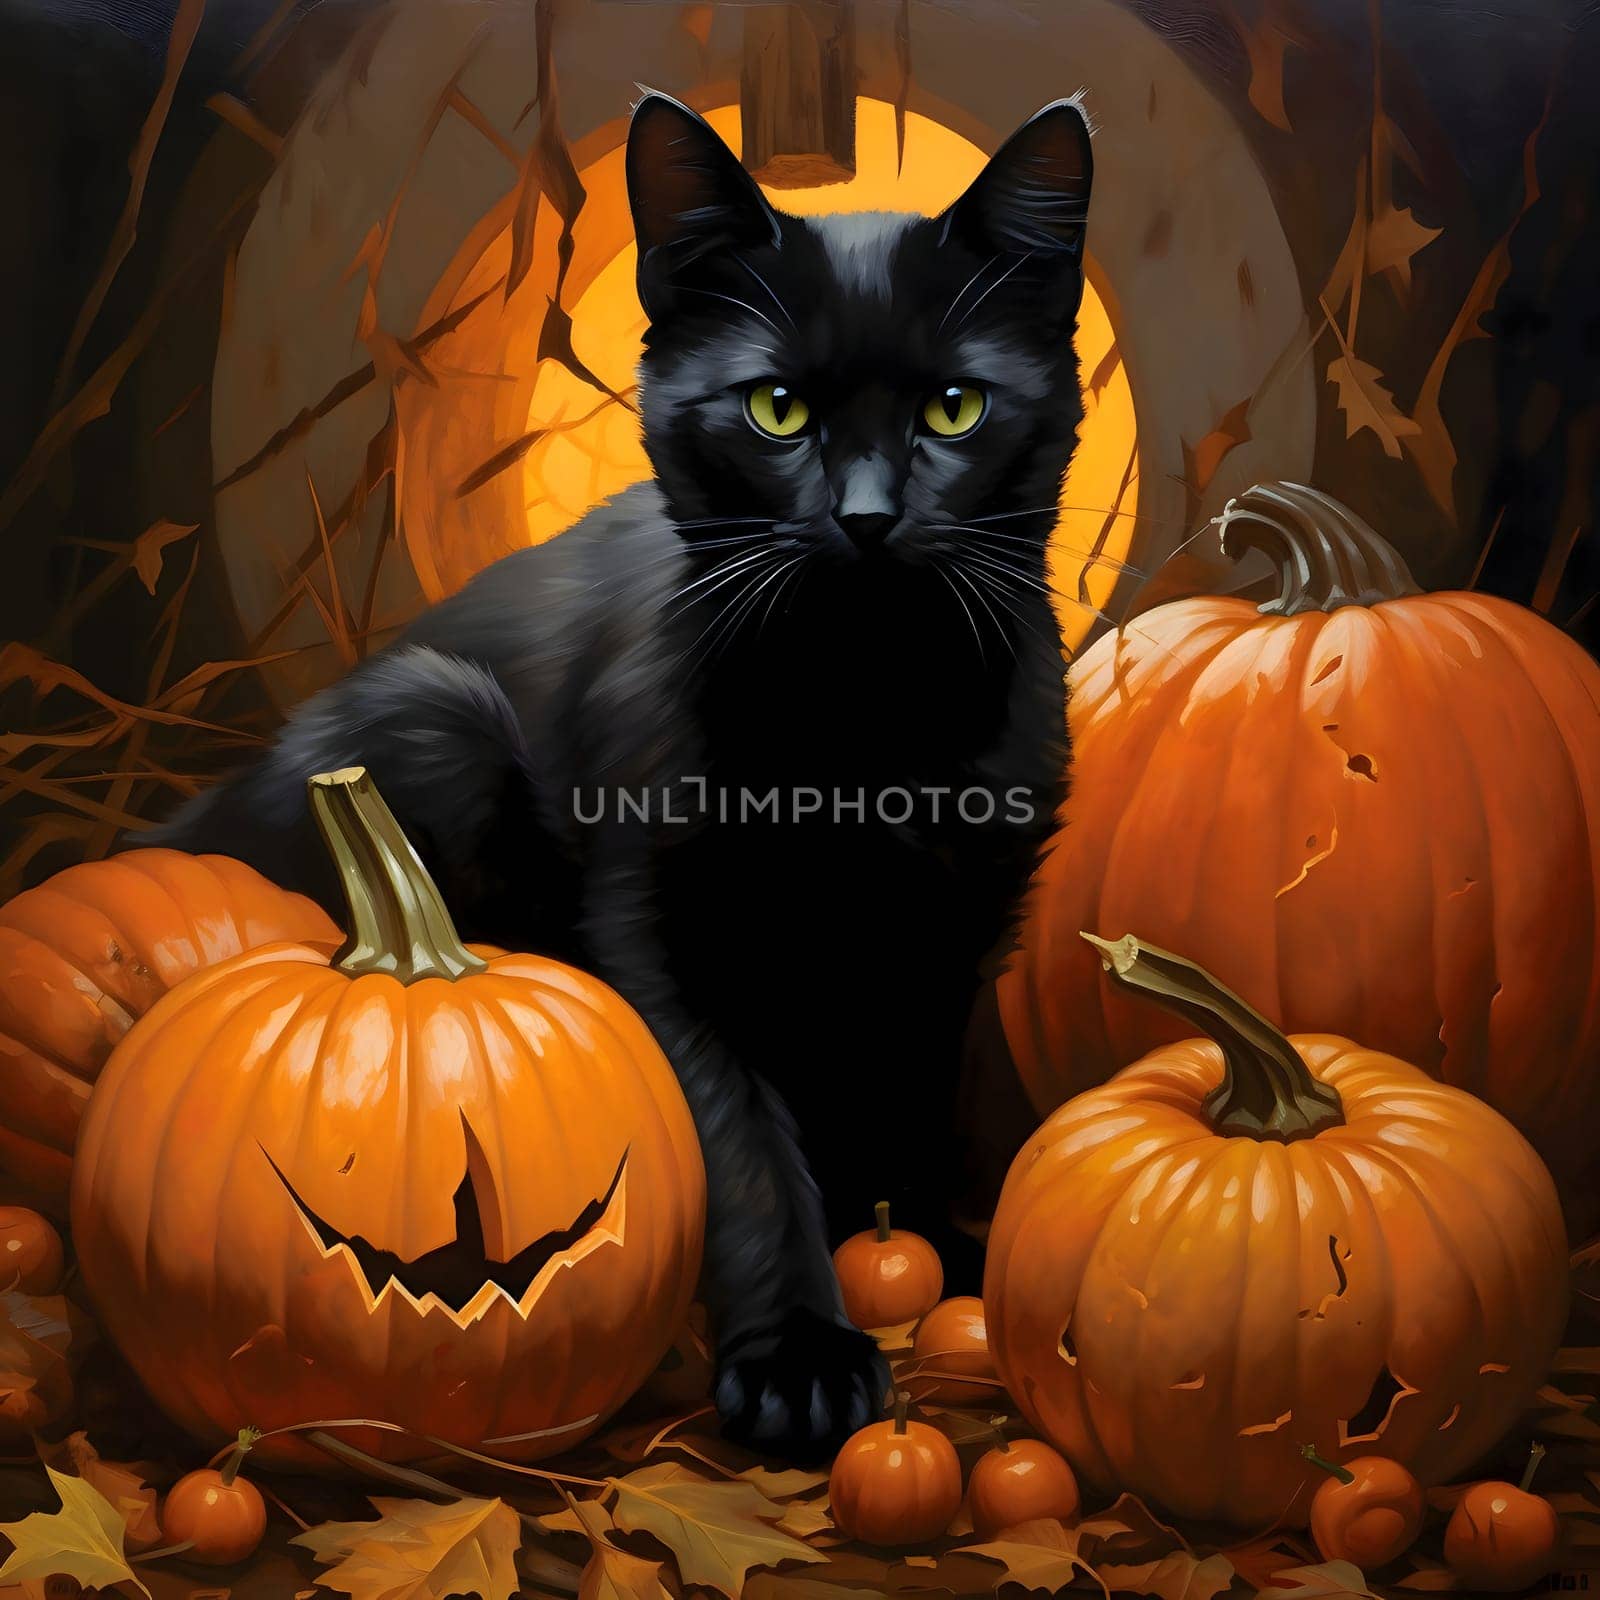 Black cat around the pumpkins, a Halloween image. Atmosphere of darkness and fear.